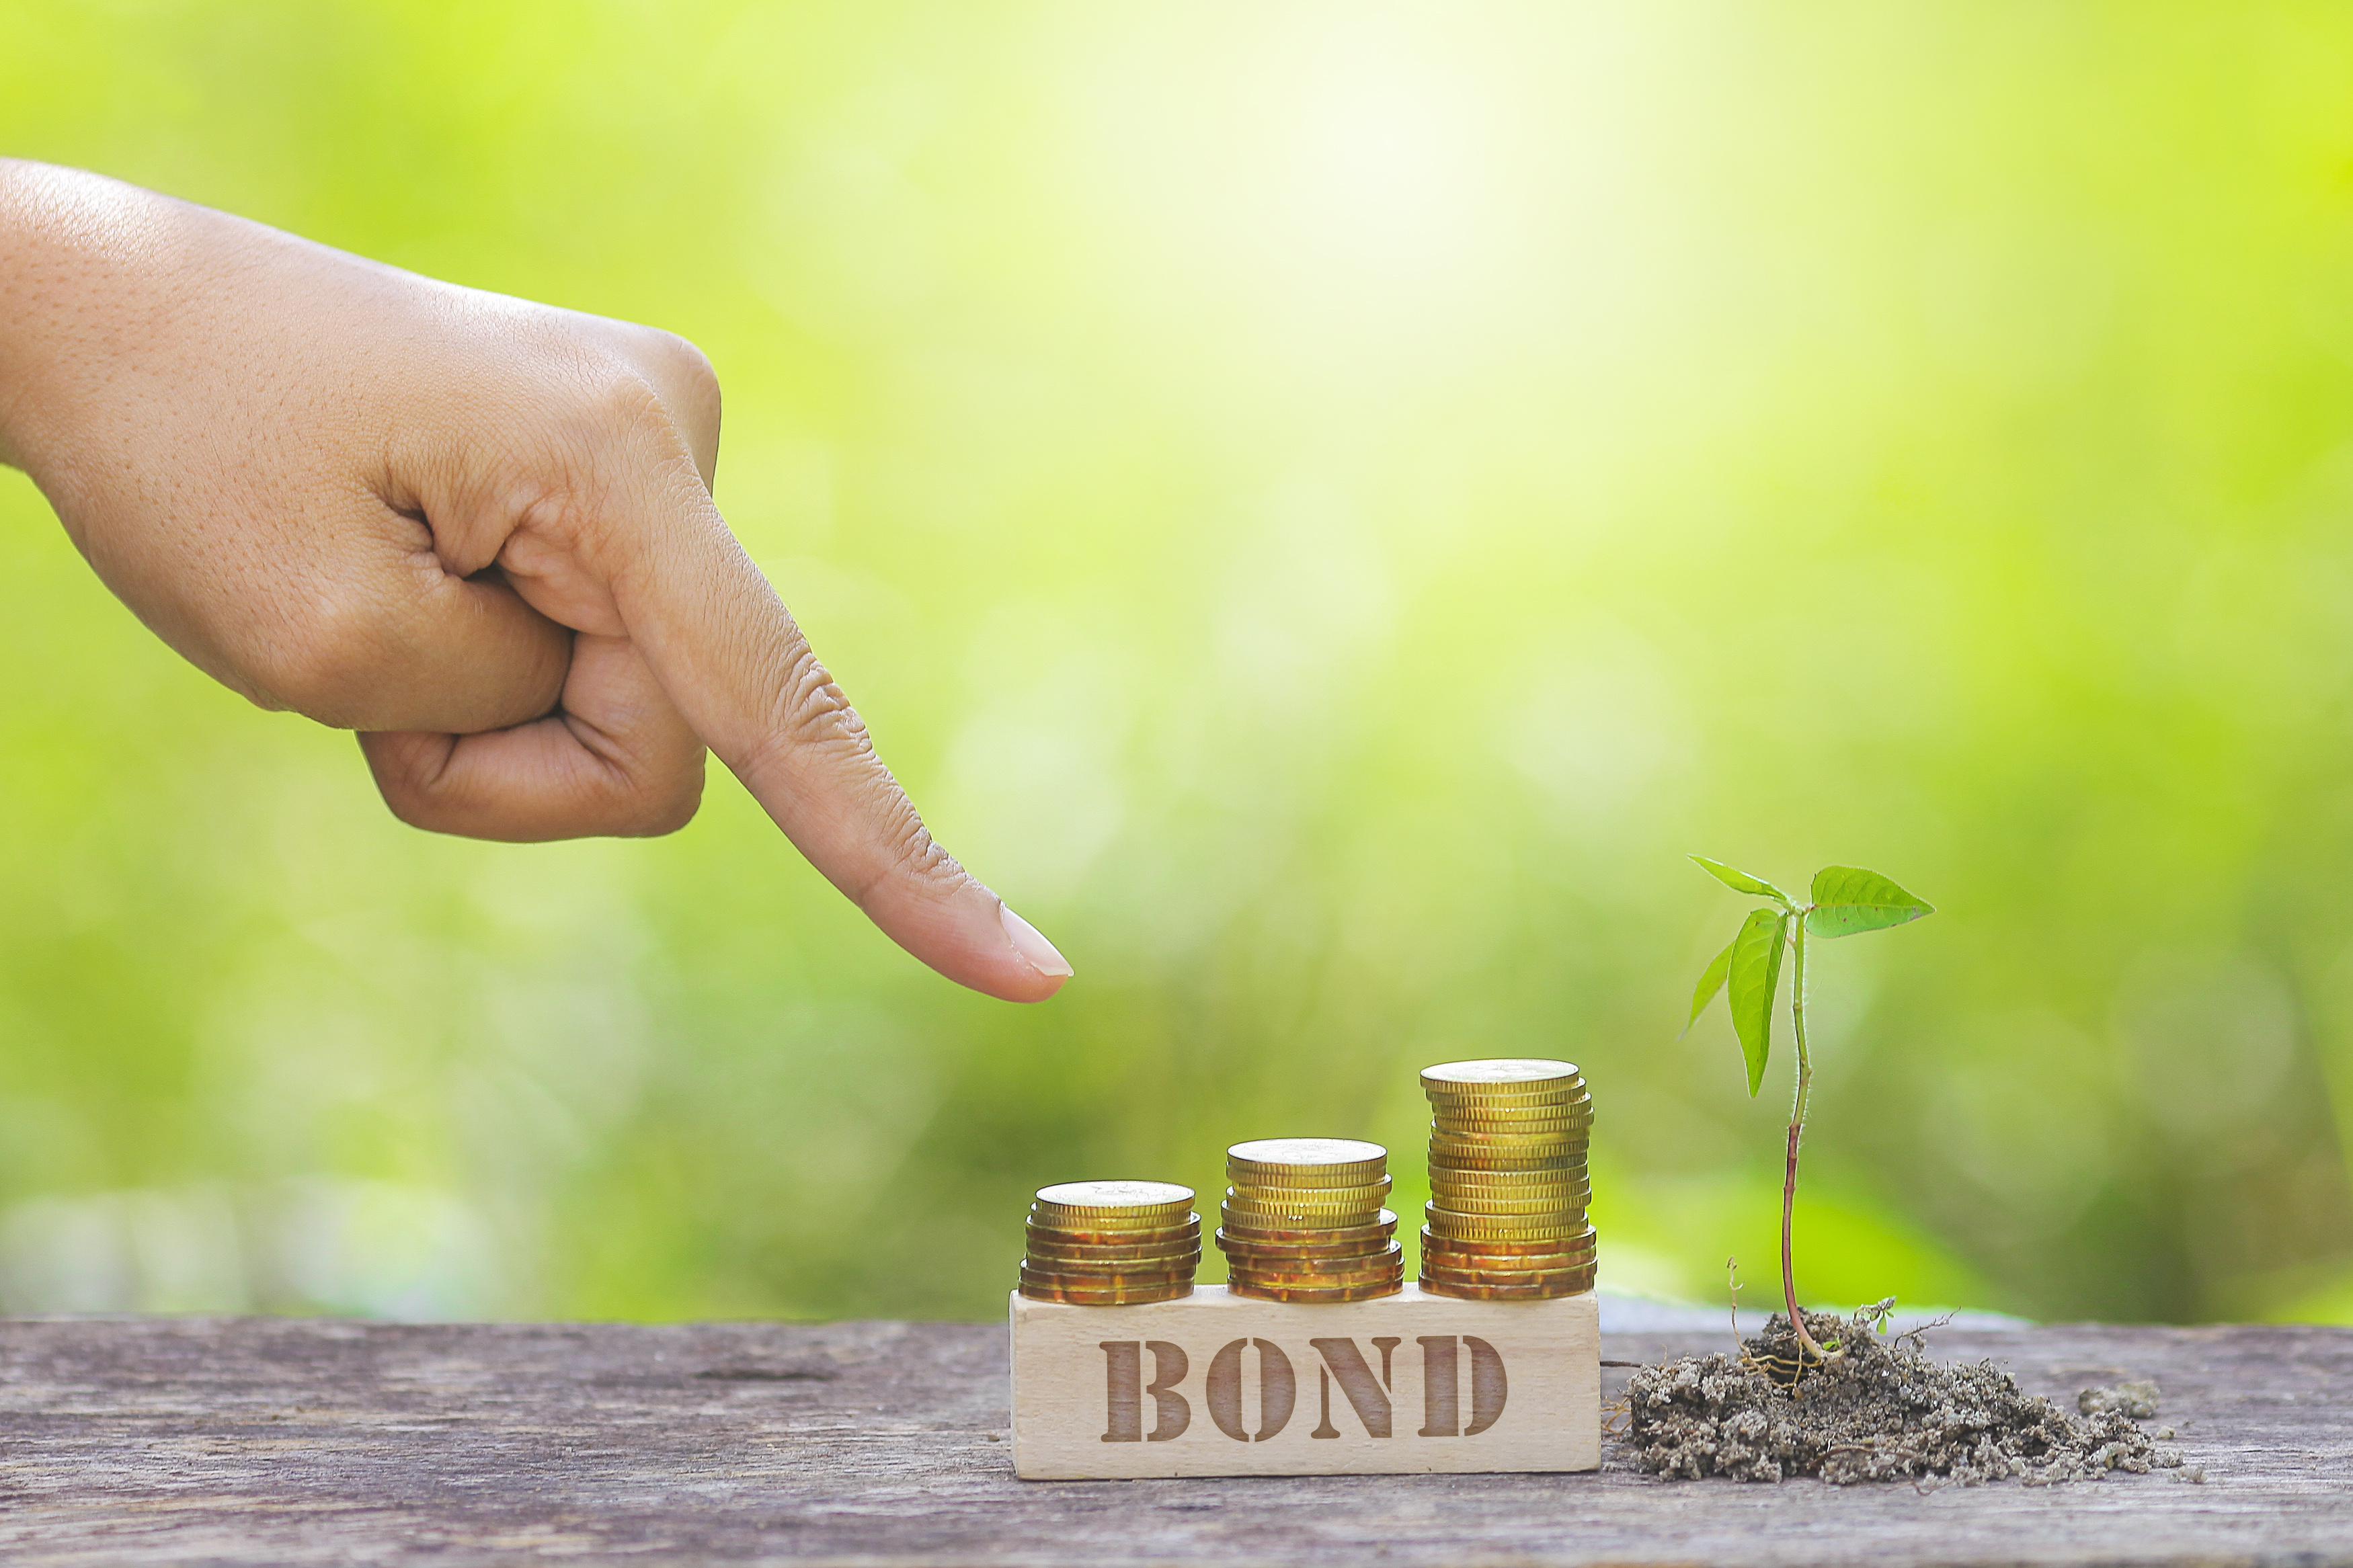 Green Bonds: the Sovereign Issuers' Perspective